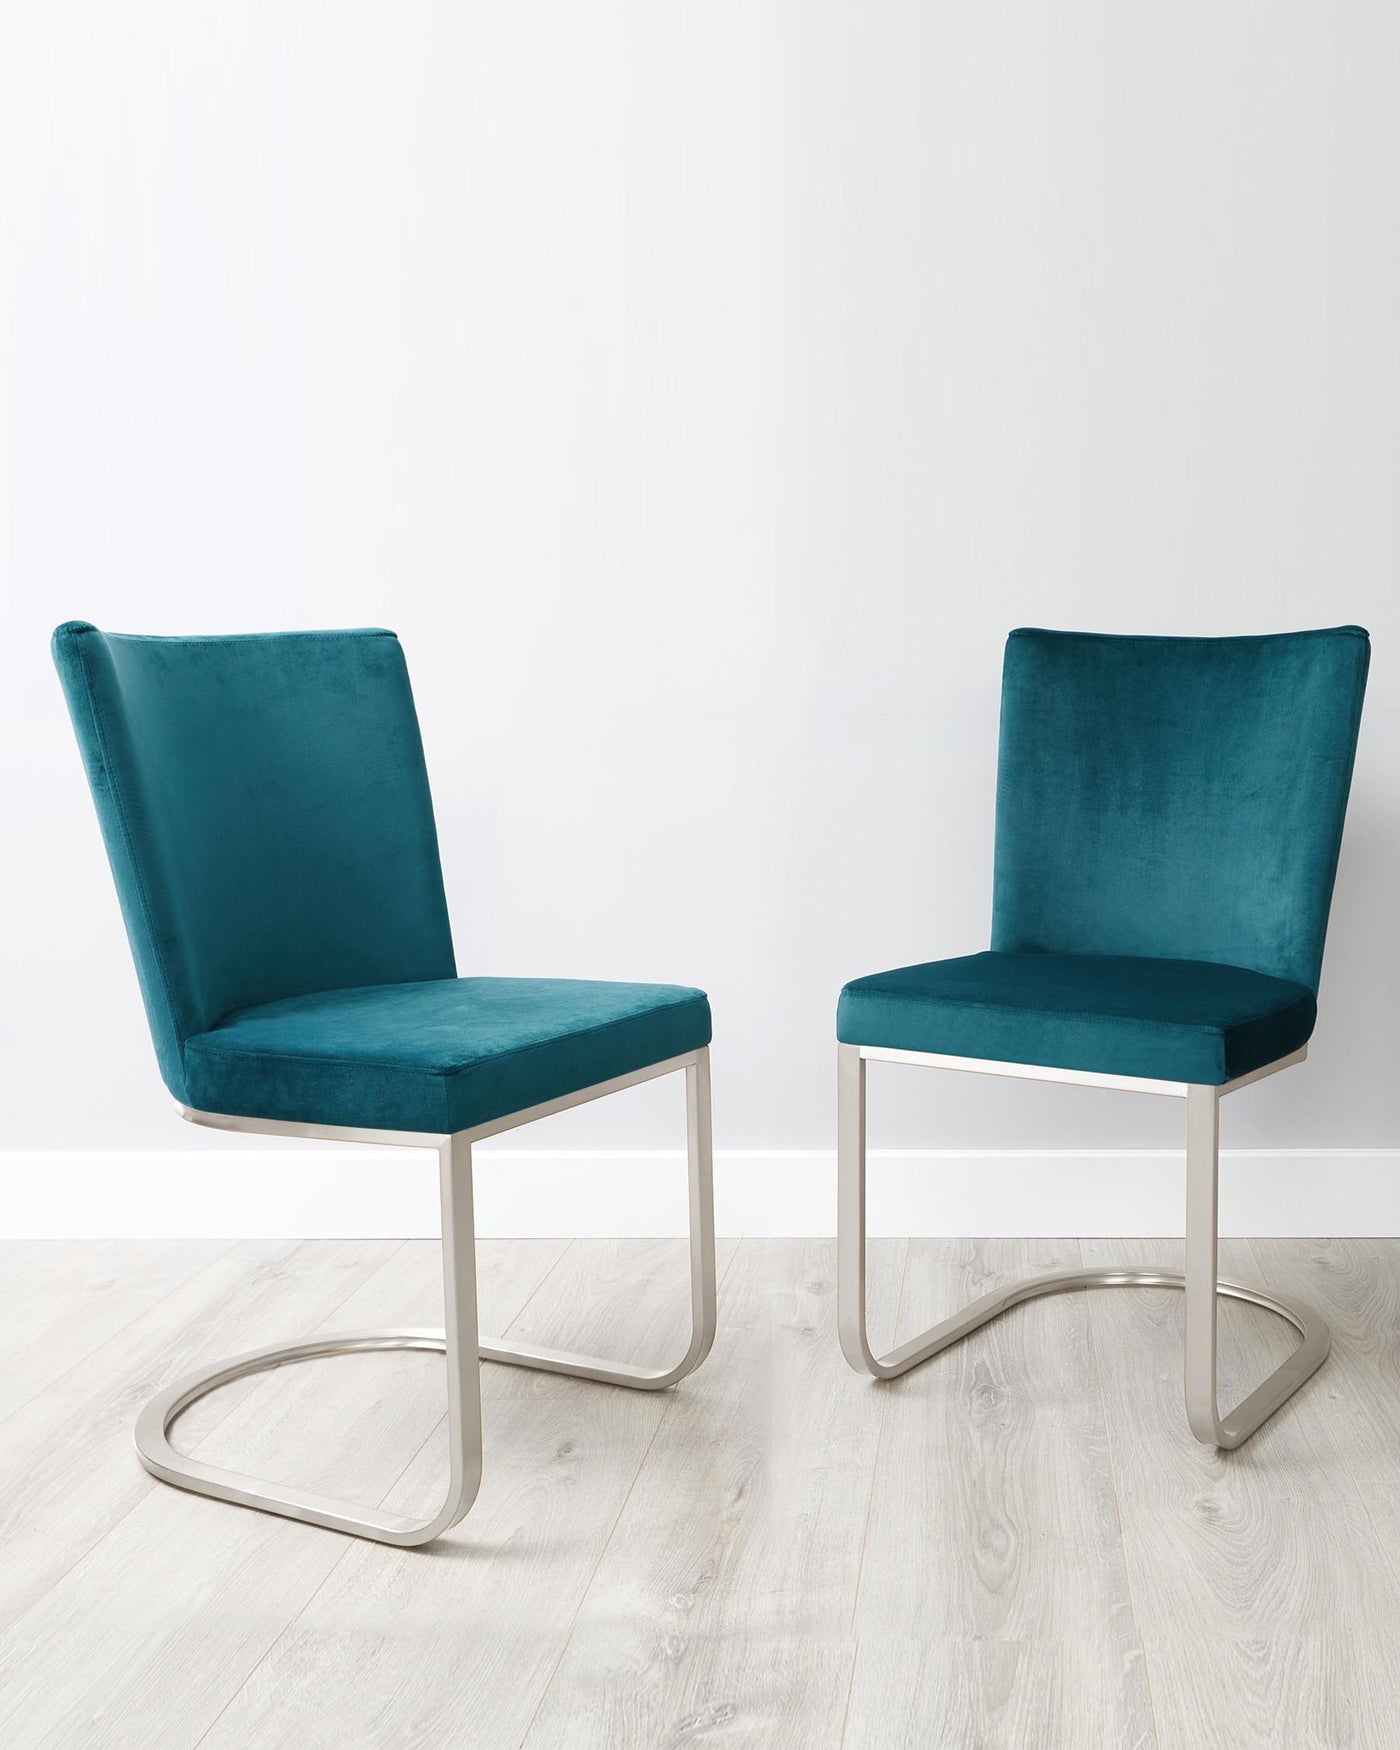 Two contemporary teal velvet dining chairs with sleek silver metal cantilever bases, on a light wooden floor against a white background.